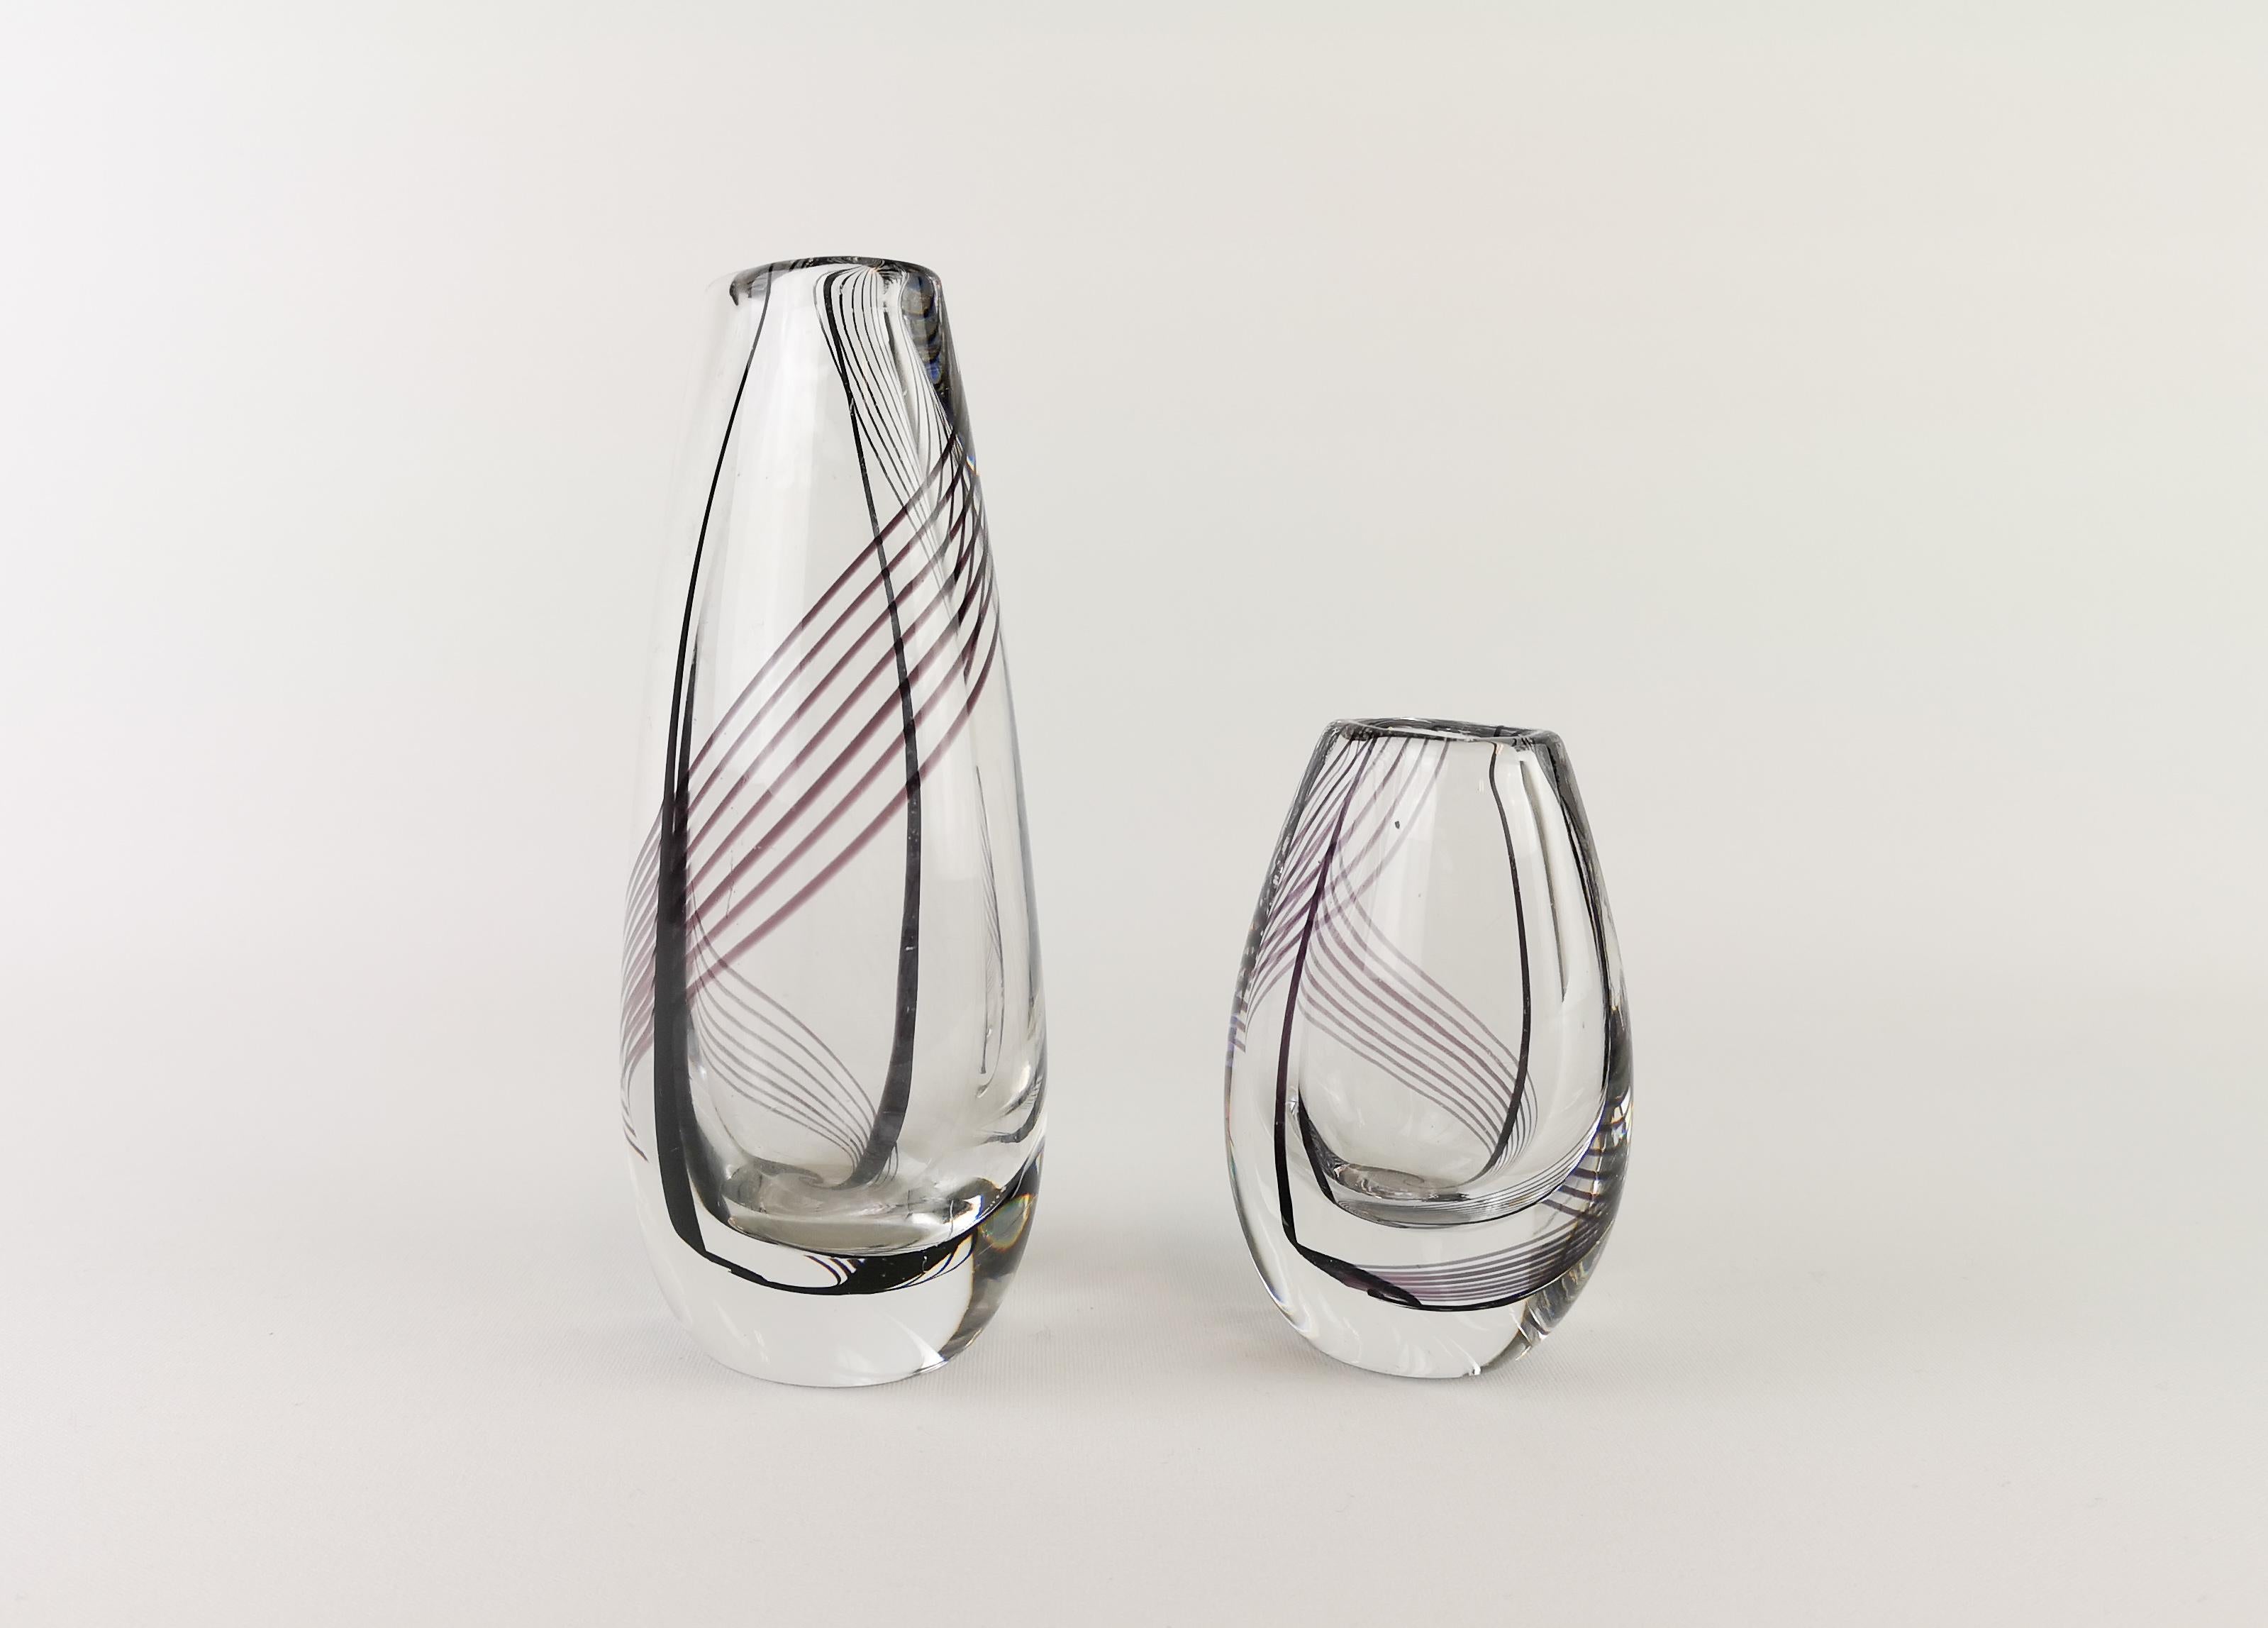 Exceptional heavy thick art glass vases fabricated by Kosta Boda, Sweden, 1959. These vases was designed and signed by Vicke Lindstrand. The vases is clear cased glass with a nice pattern of black and purple swirling lines.
The small one signed on